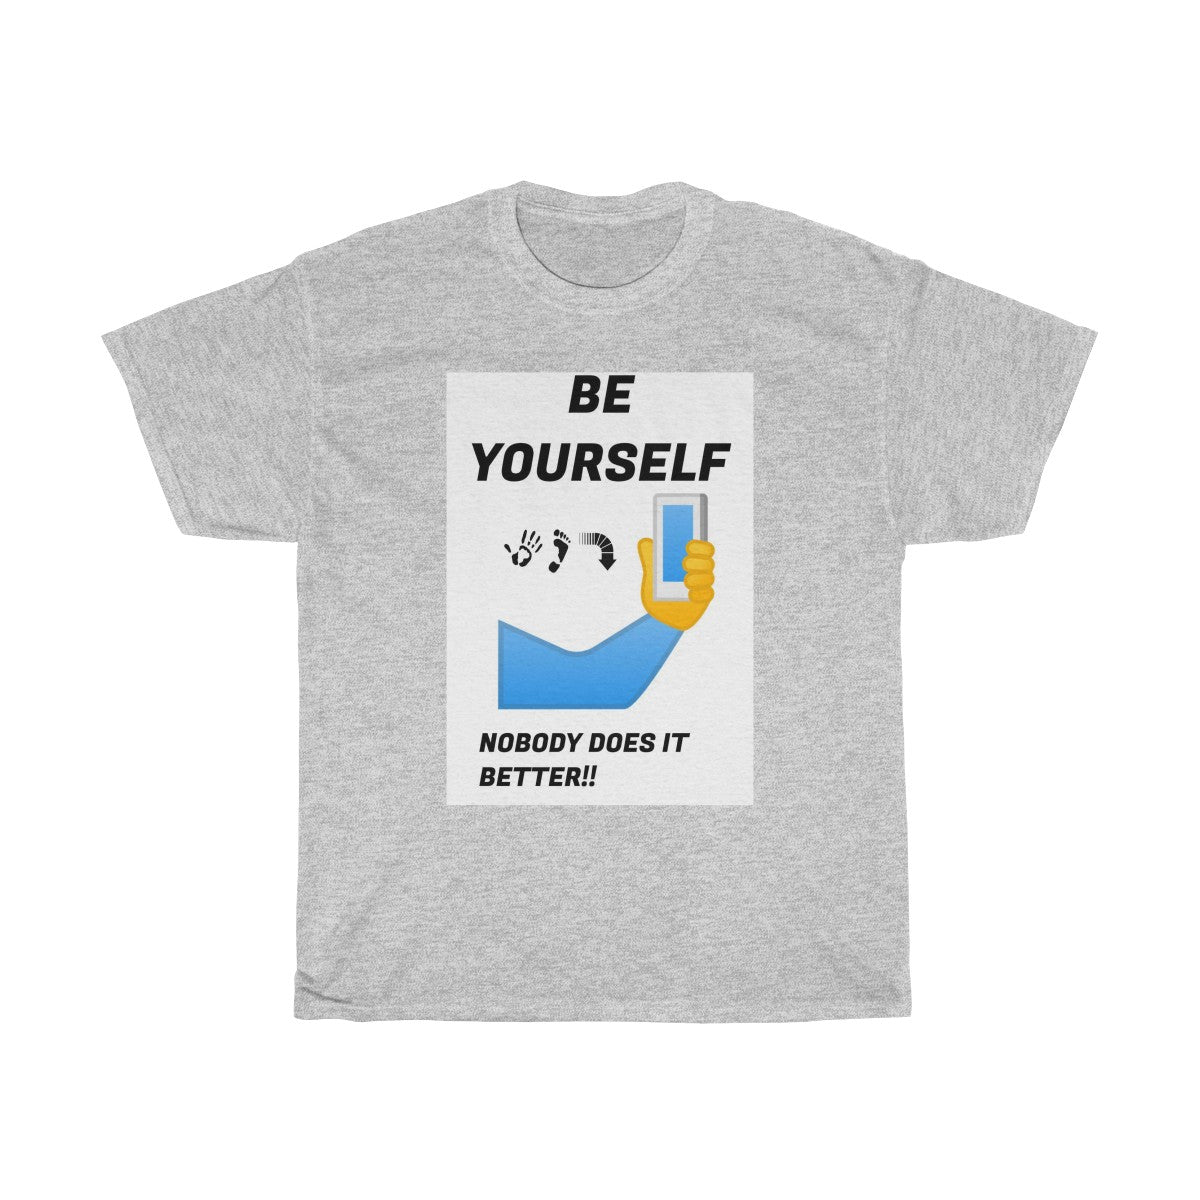 Five Toes Down Be Yourself Unisex Tee